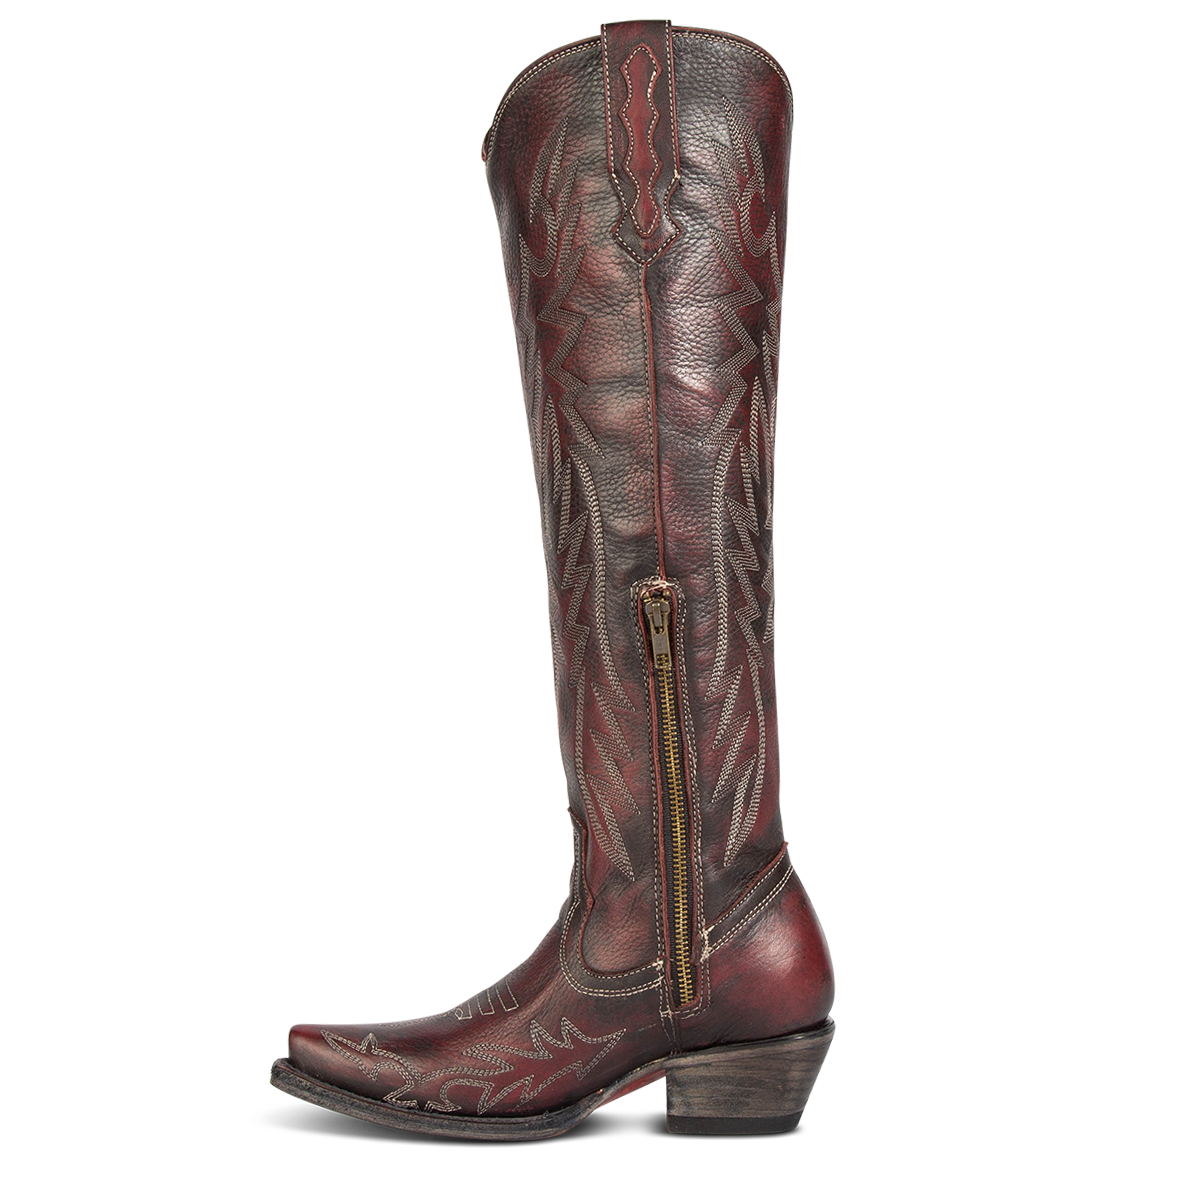 Inside view showing stitch detailing and zipper on FREEBIRD women's Wonder wine leather tall western boot